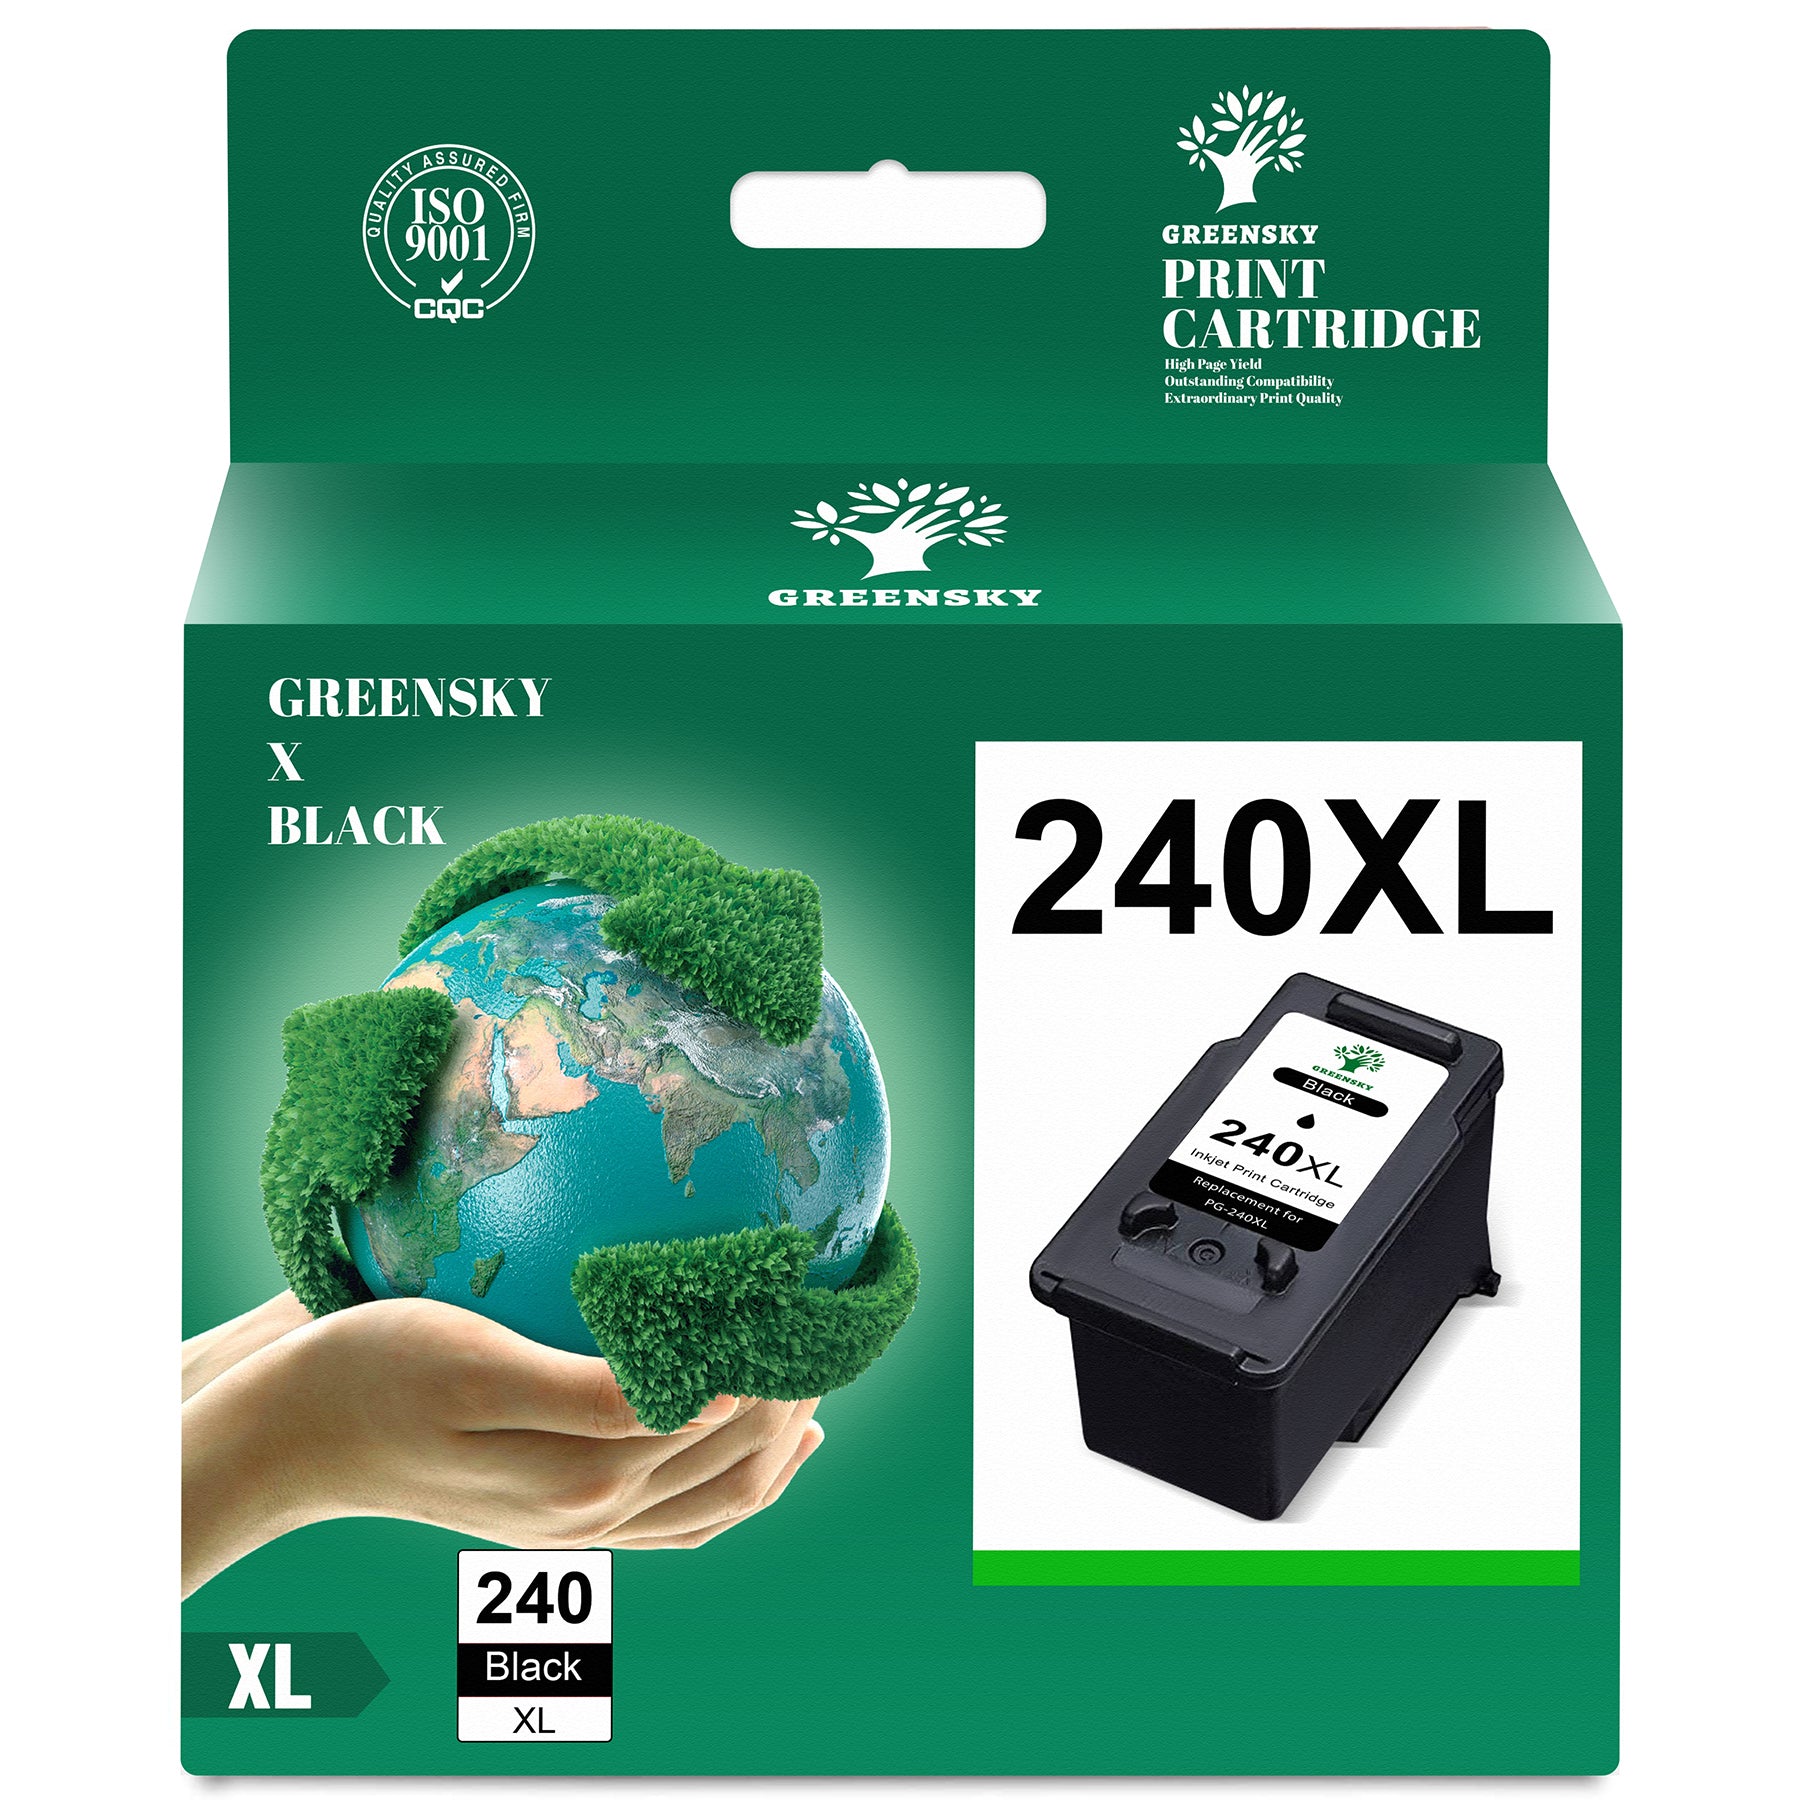 240XL Black Ink Cartridges Replacement for Canon PG 240